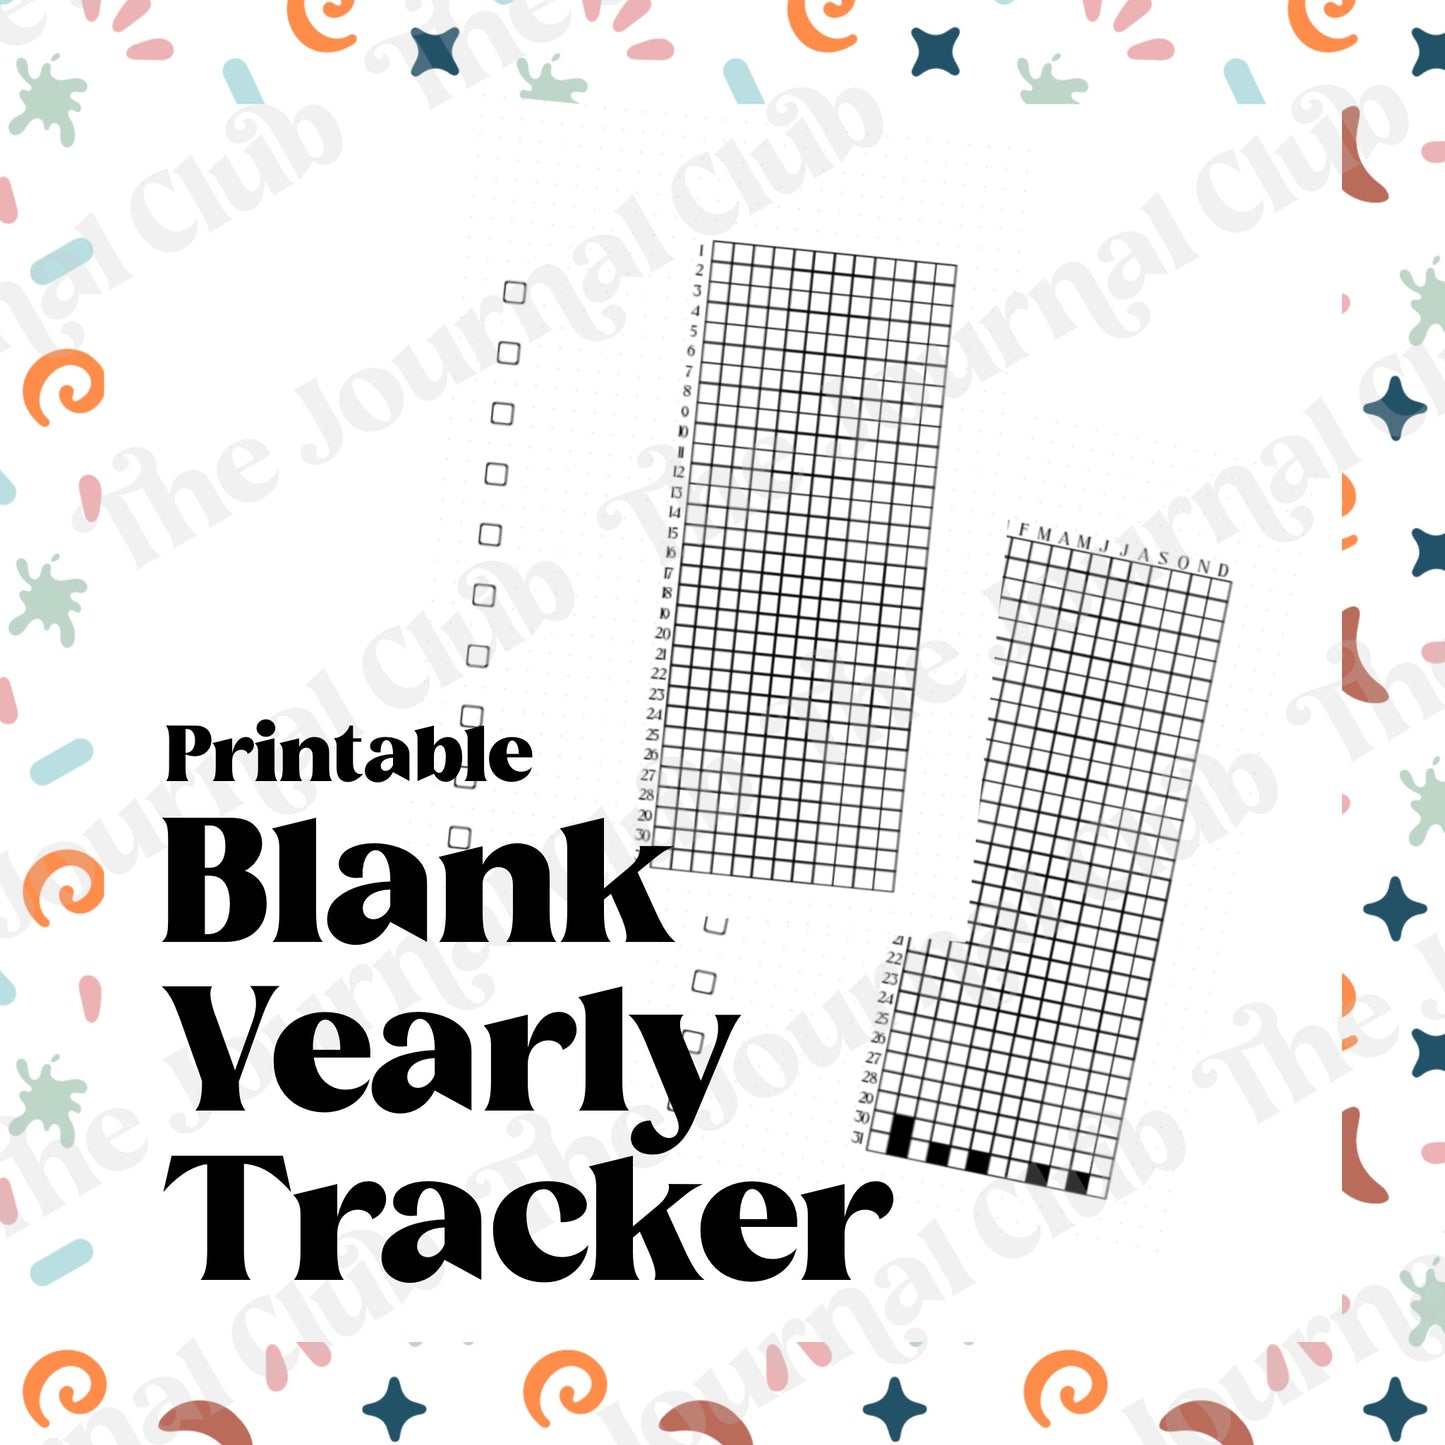 Printable - Blank Yearly Tracker Page